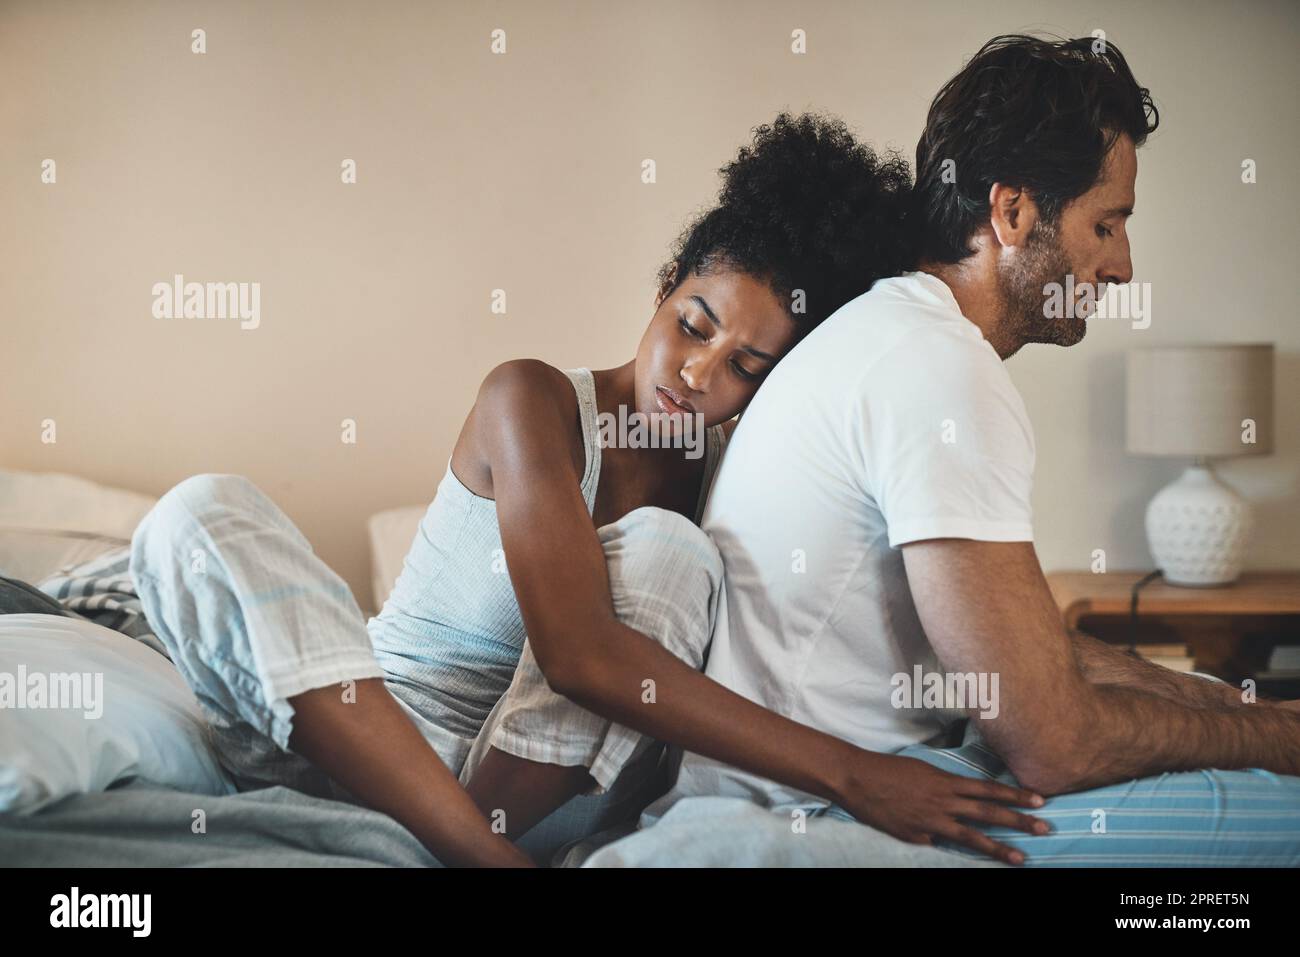 Woman tries to embrace her husband with affection after their fight at home. Unhappy interracial couple with marriage problems forgive each other. Empathy and guilty feelings after the affair. Stock Photo